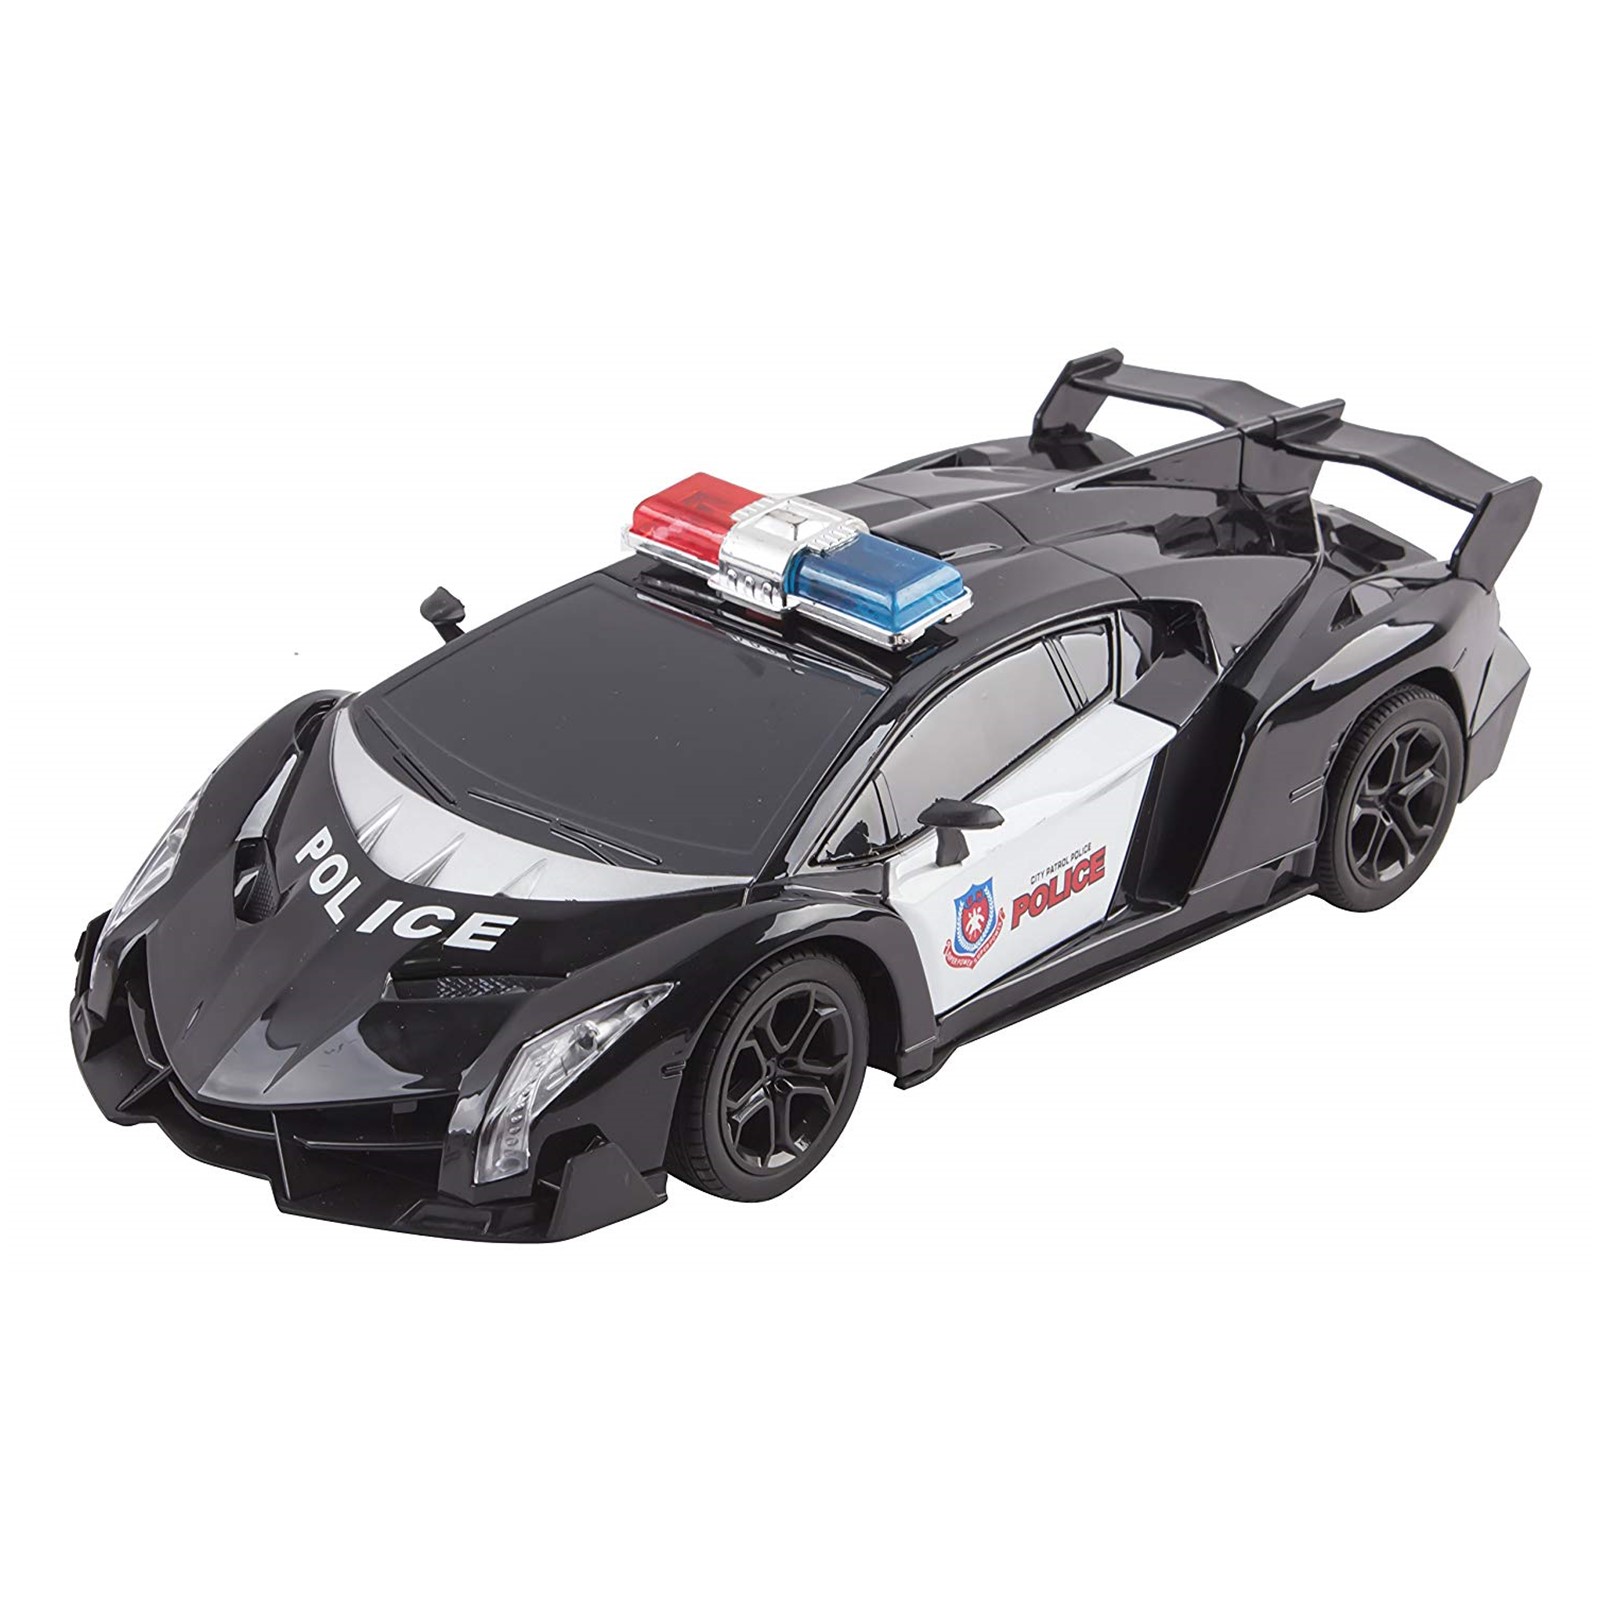 Police RC Car Super Exotic Large 116 Scale Size Kids Remote Control Easy To Operate Toy Sports Cars With Functional LED Headlights Perfect Cop Race Vehicle Full Function Black